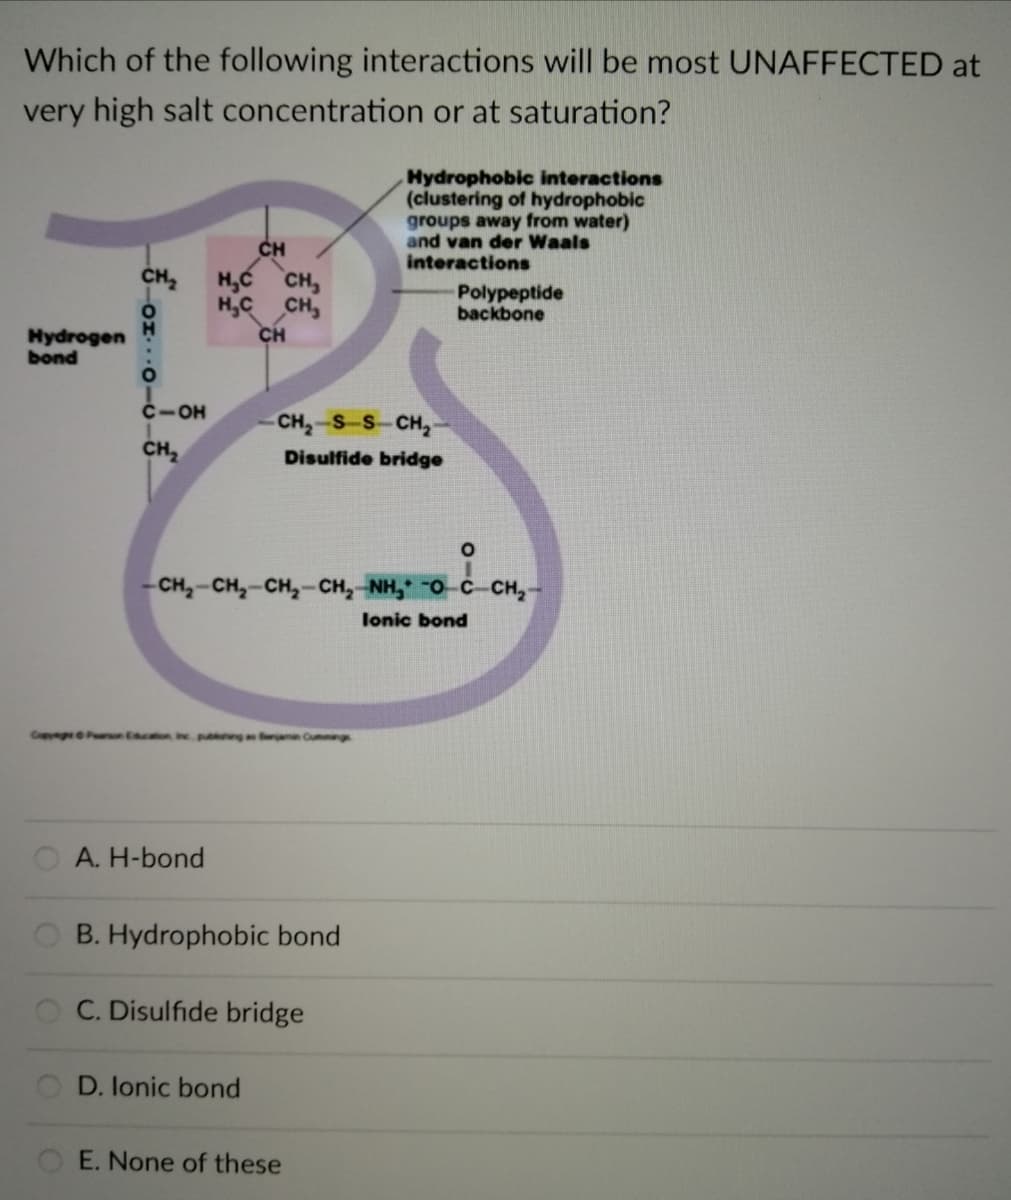 Which of the following interactions will be most UNAFFECTED at
very high salt concentration or at saturation?
Hydrophobic interactions
(clustering of hydrophobic
groups away from water)
and van der Waals
interactions
CH
CH,
H,C CH,
H,C CH,
CH
Polypeptide
backbone
Hydrogen
bond
C-OH
CH-S S CH,
CH2
Disulfide bridge
- CH,-CH,-CH,-CH, NH, -O C-CH,
lonic bond
CopyegPon Econ p g n Cun
A. H-bond
O B. Hydrophobic bond
O C. Disulfide bridge
D. lonic bond
E. None of these
